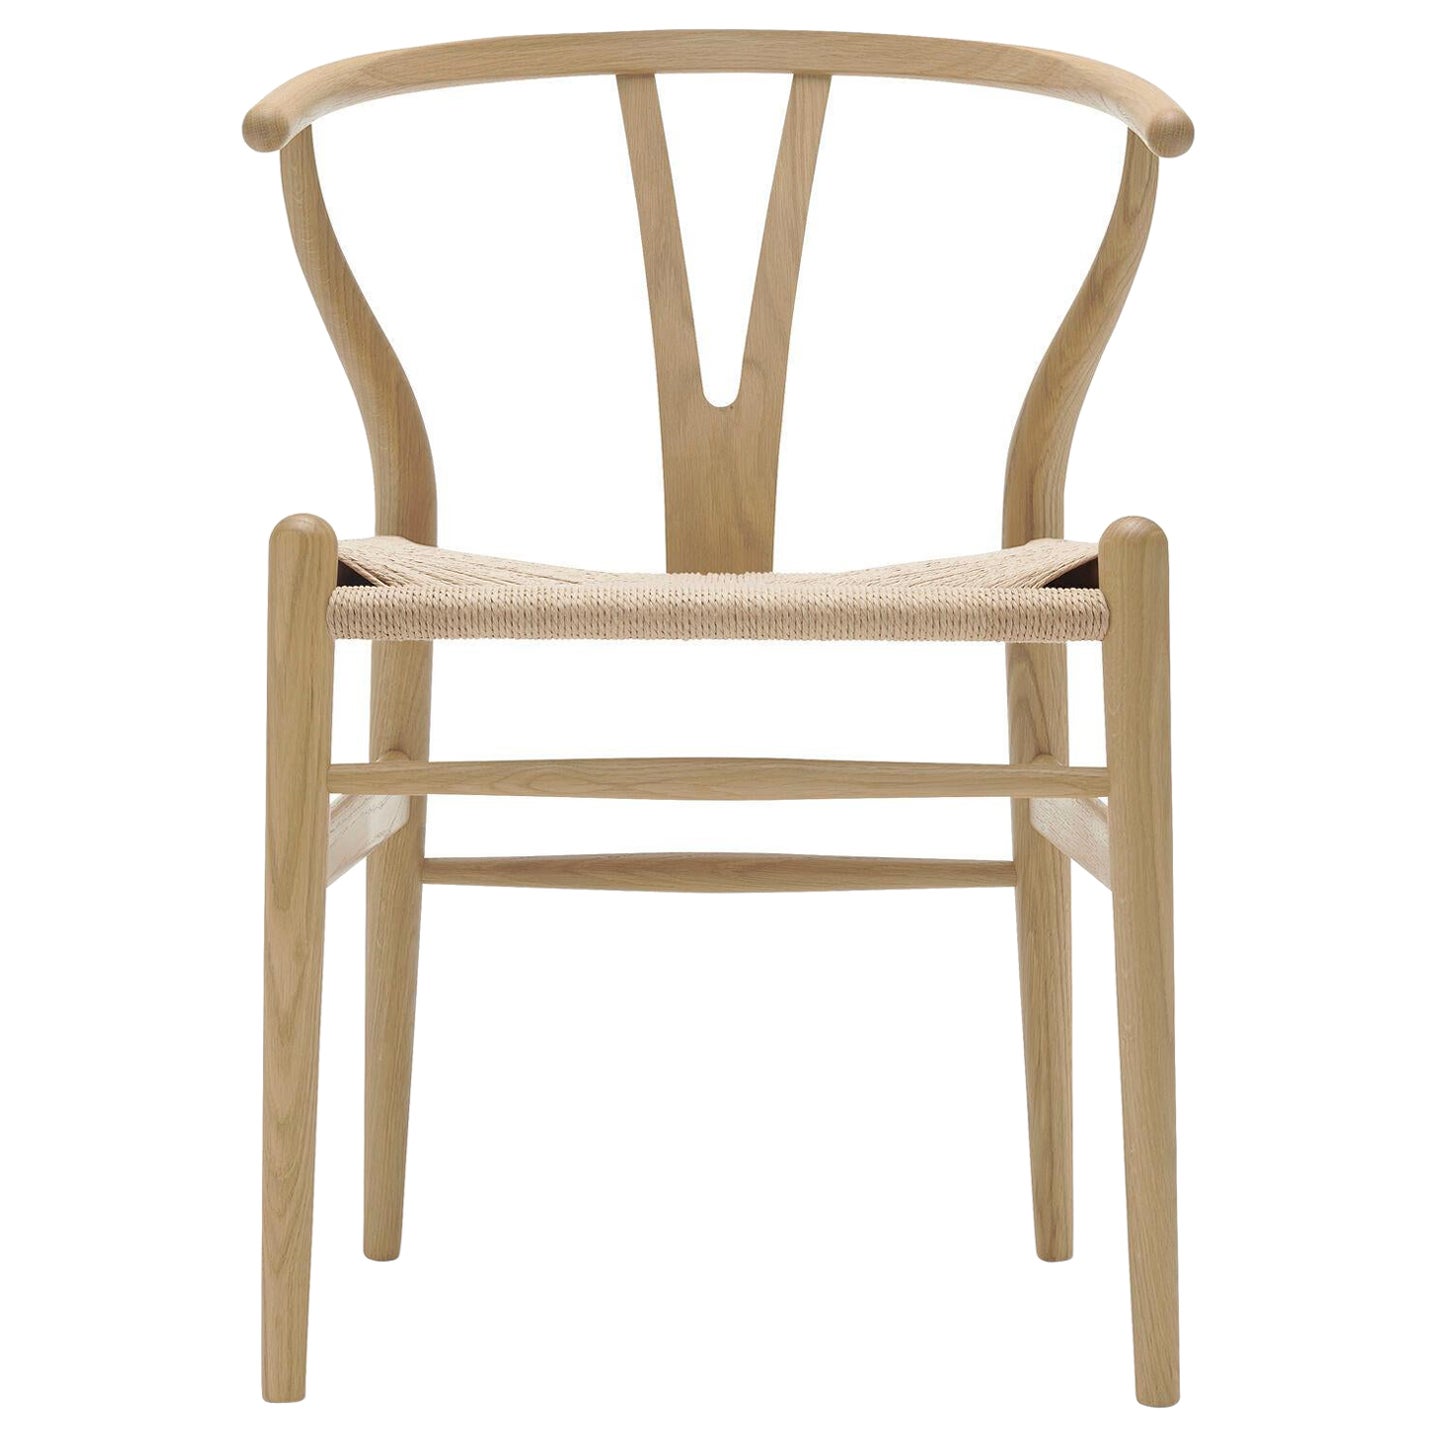 CH24 Wishbone Chair in Oak Soap Finish with Natural Papercord *Quickship*